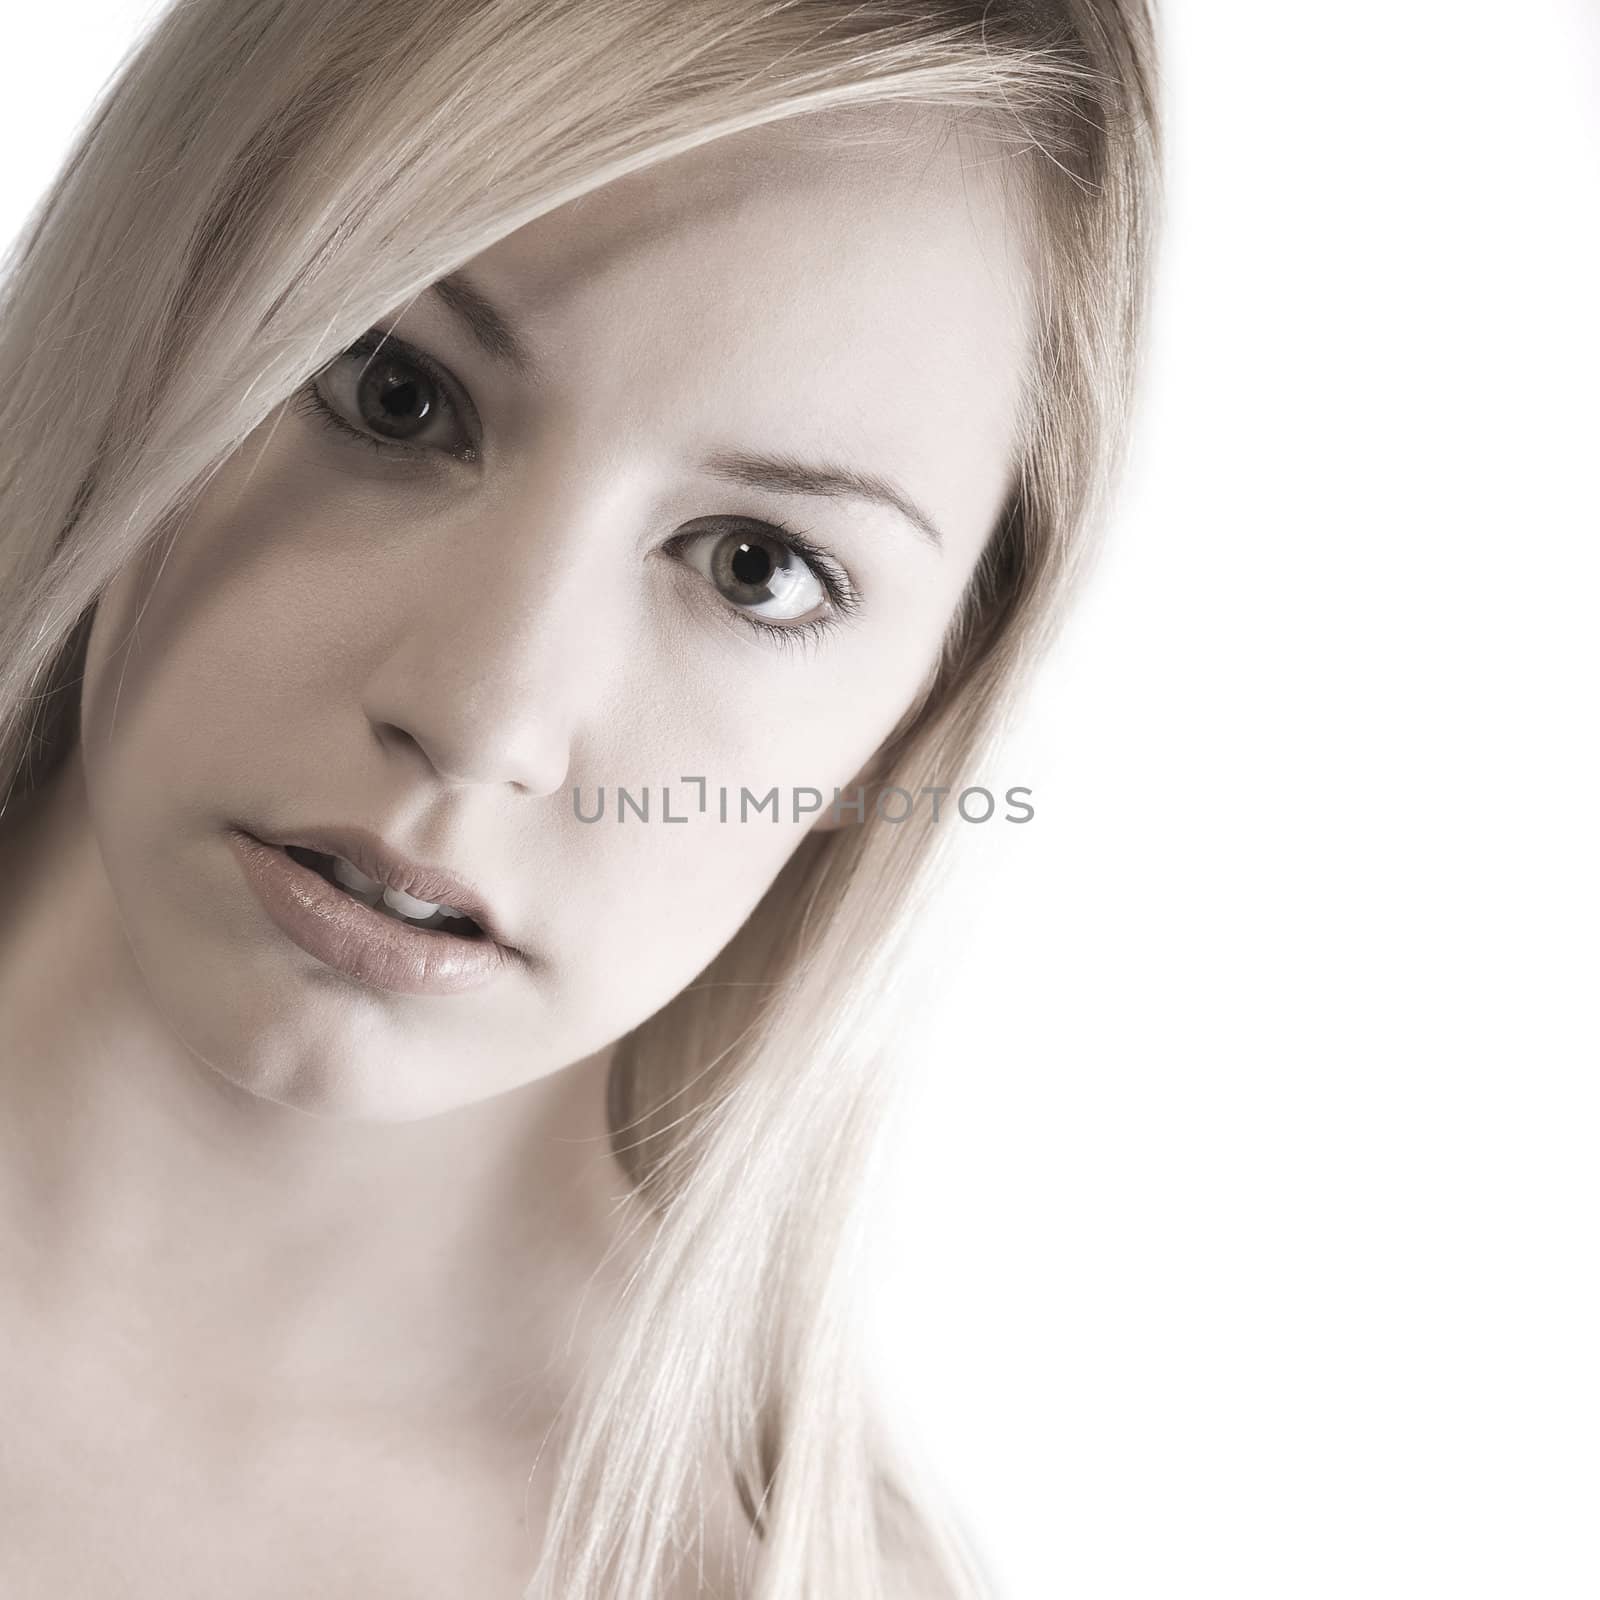 Studio portrait of a young blond woman looking beautiful